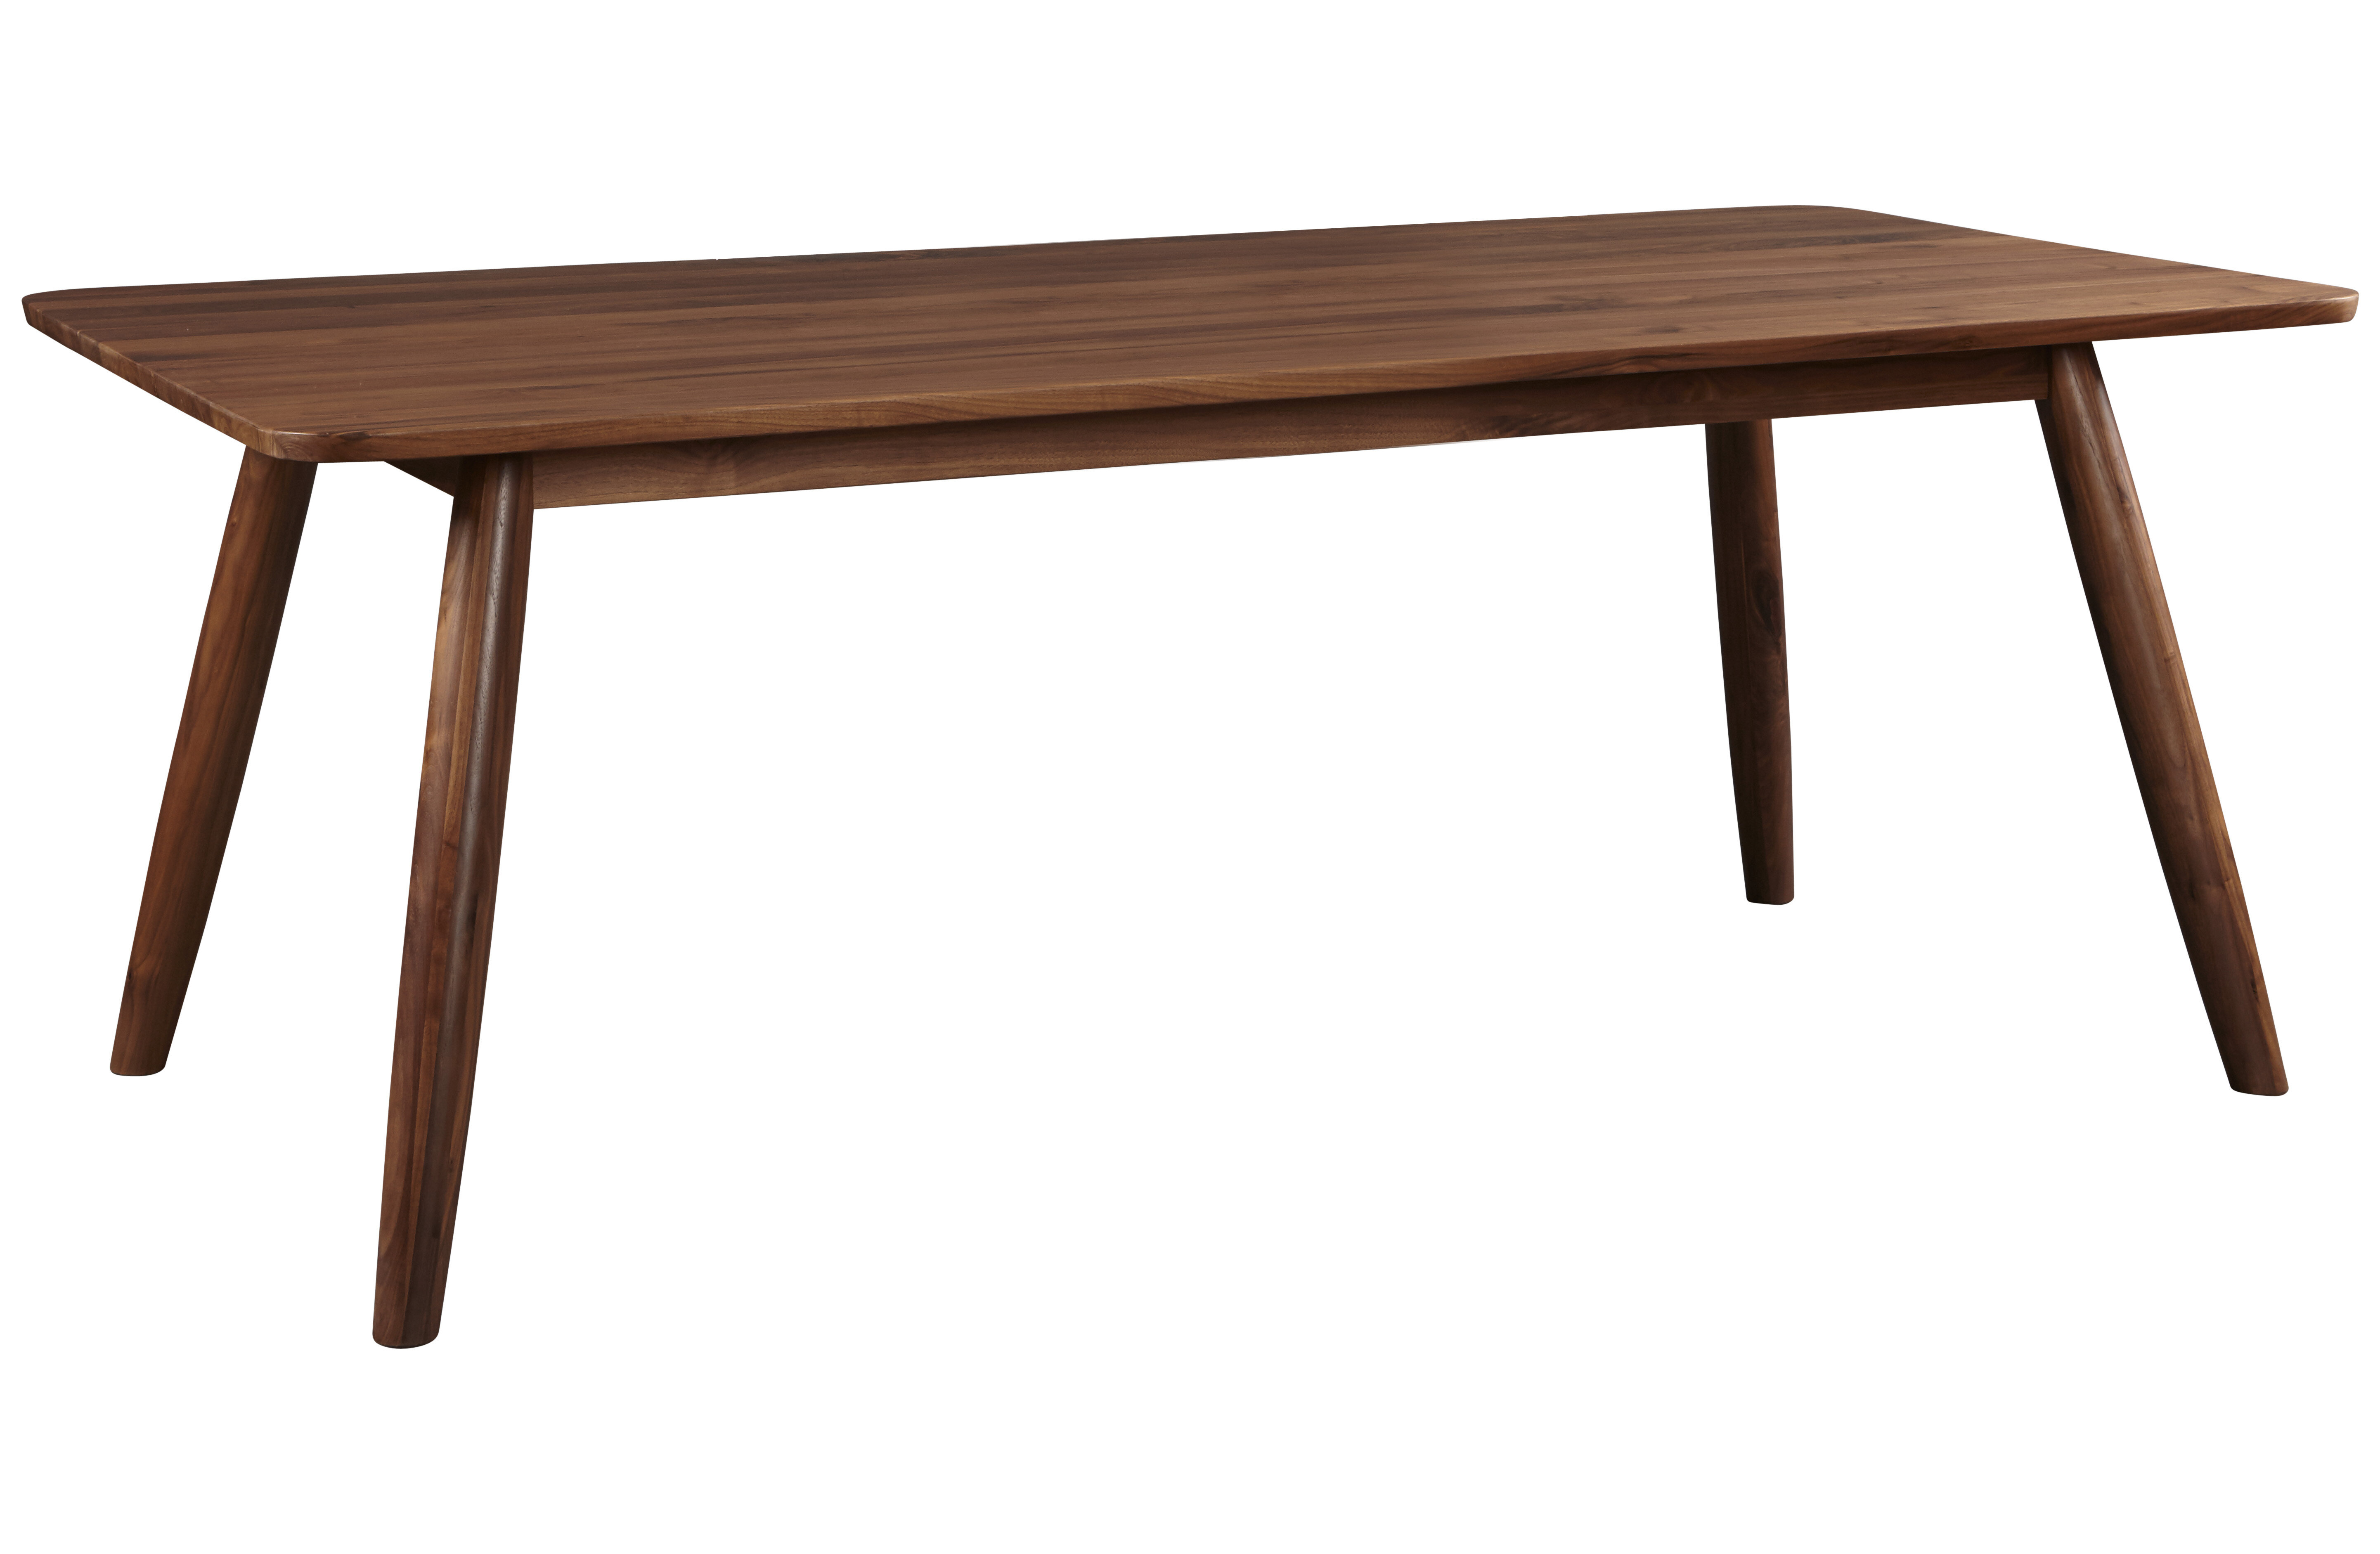 Fortine Extendable Walnut Solid Wood Dining Table Reviews